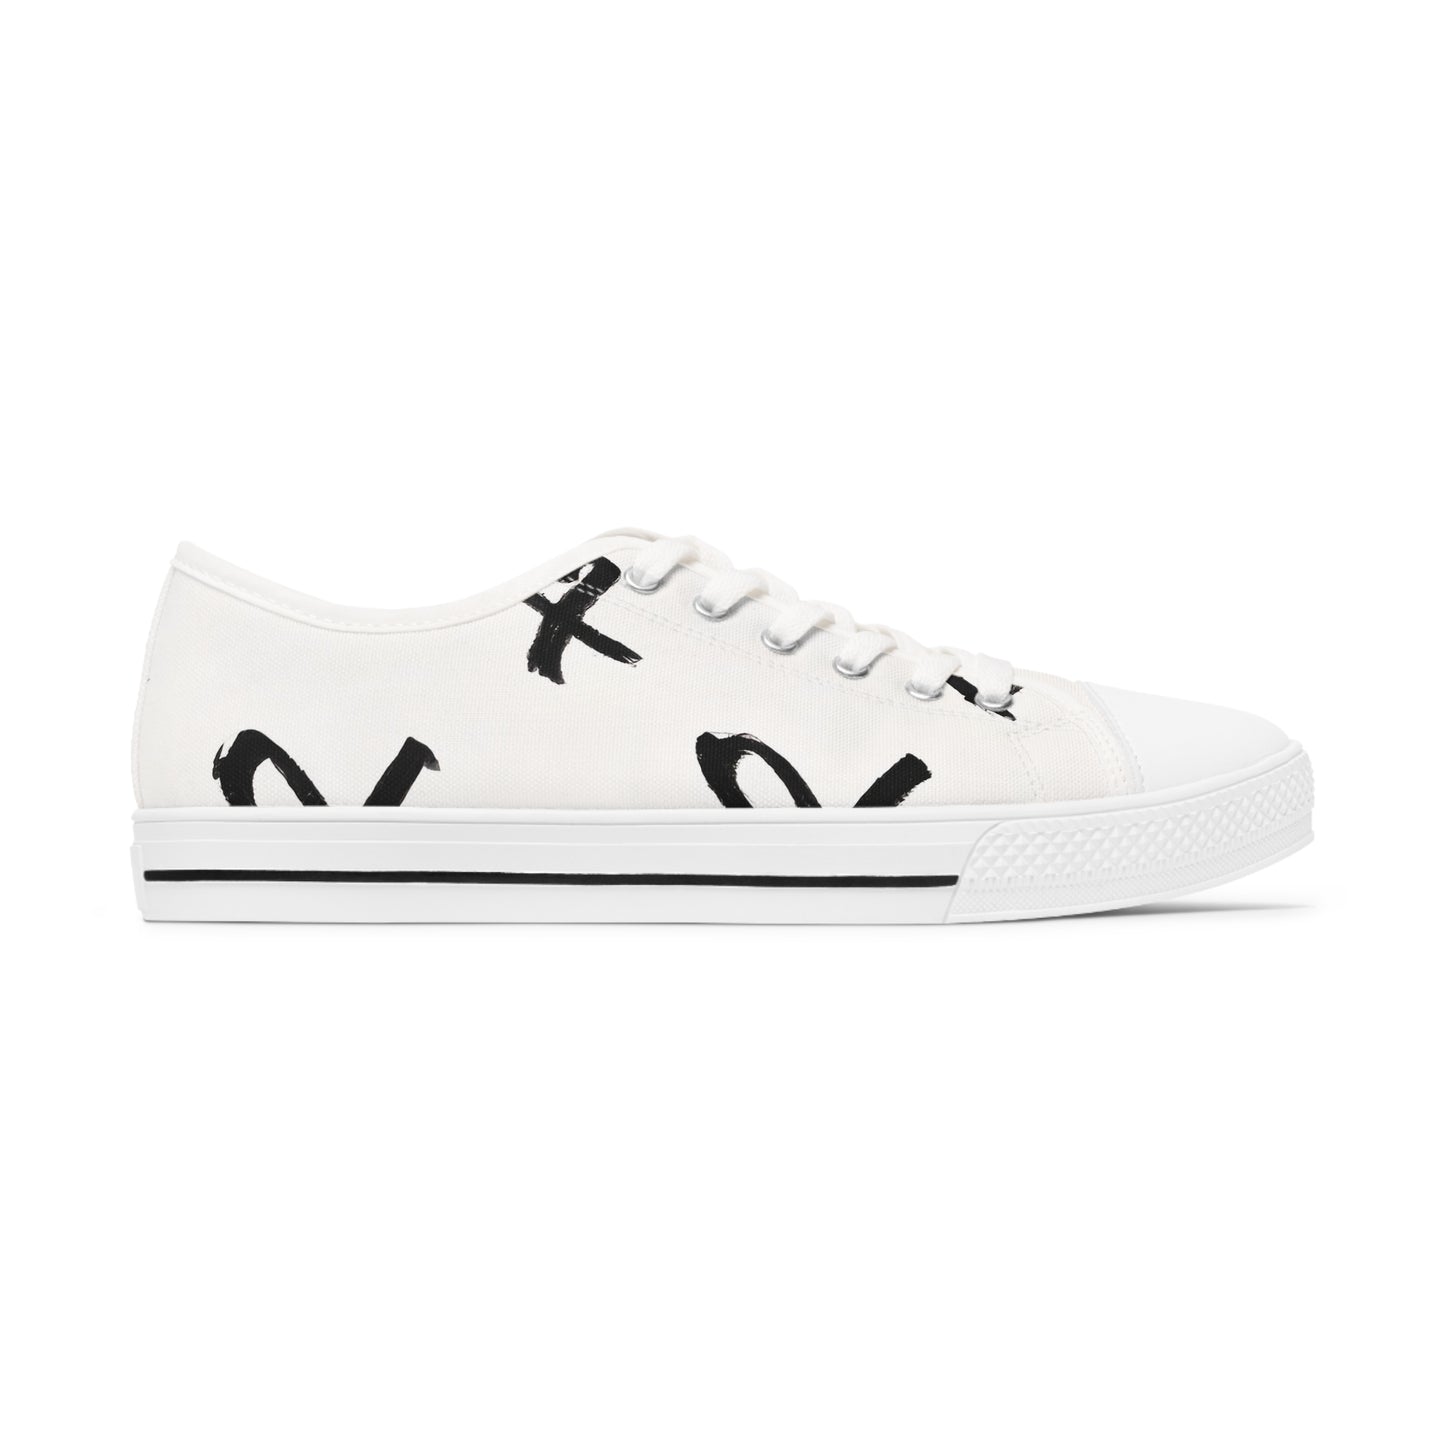 Cion Evelyn - Women's Low-Top Sneakers